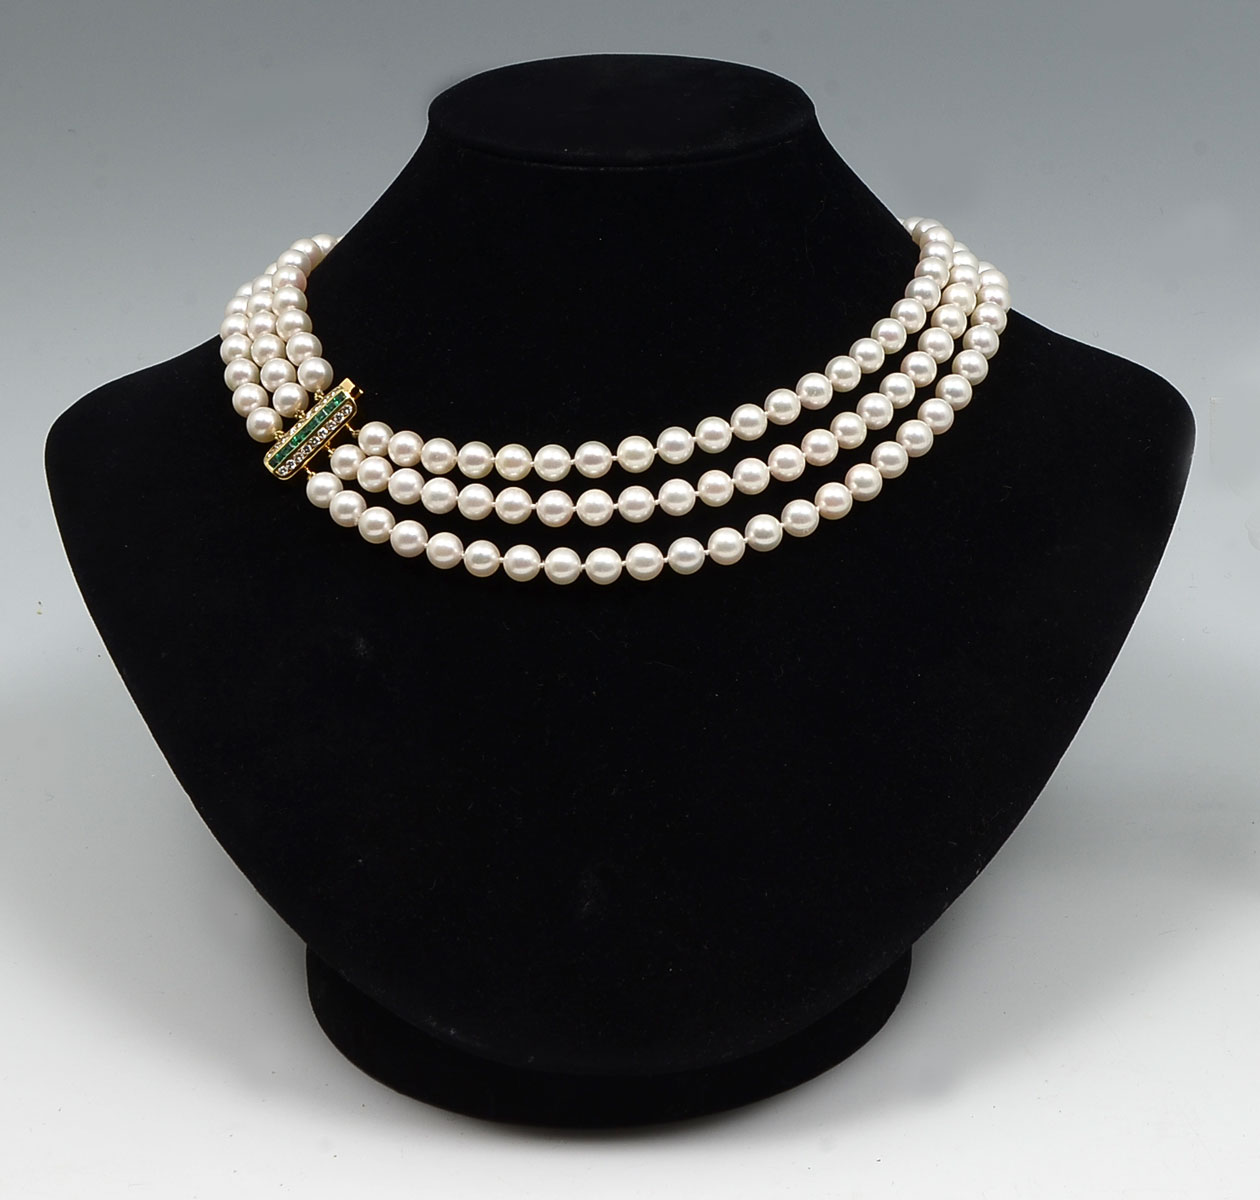 3 STRAND PEARL NECKLACE WITH 18K 276a6c